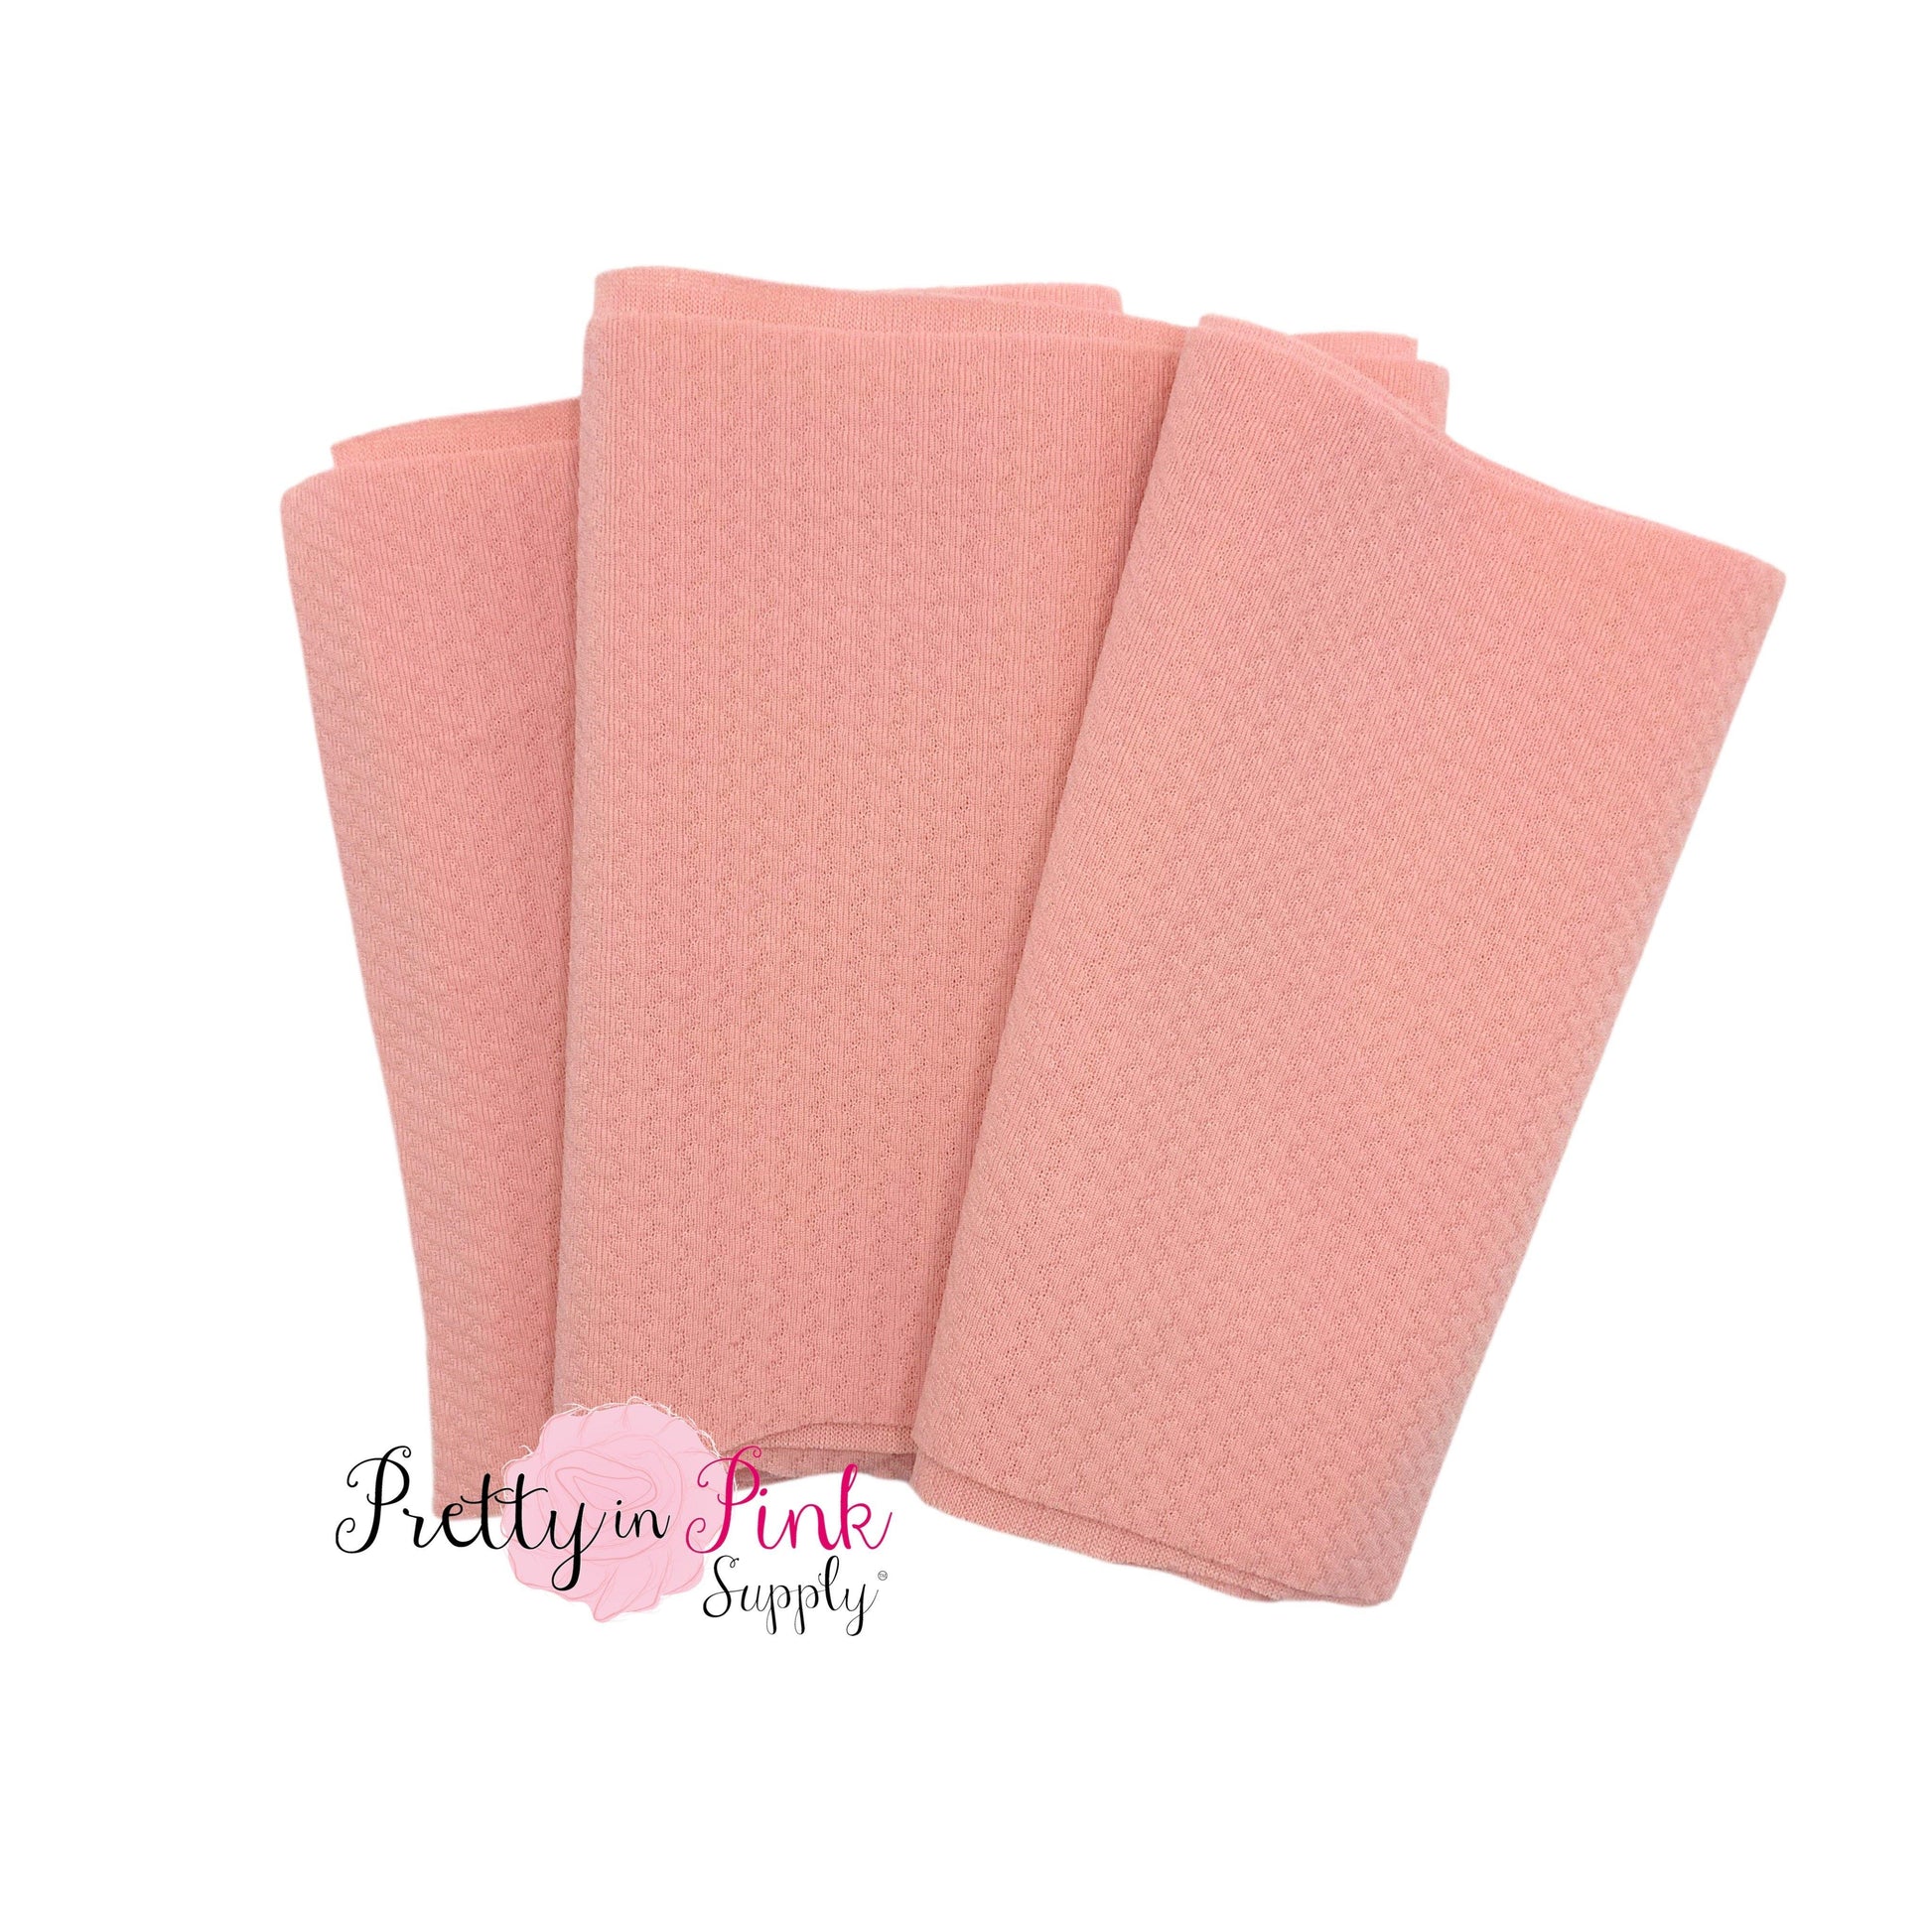 Folded over solid pastel peach color textured, stretch liverpool fabric strip.